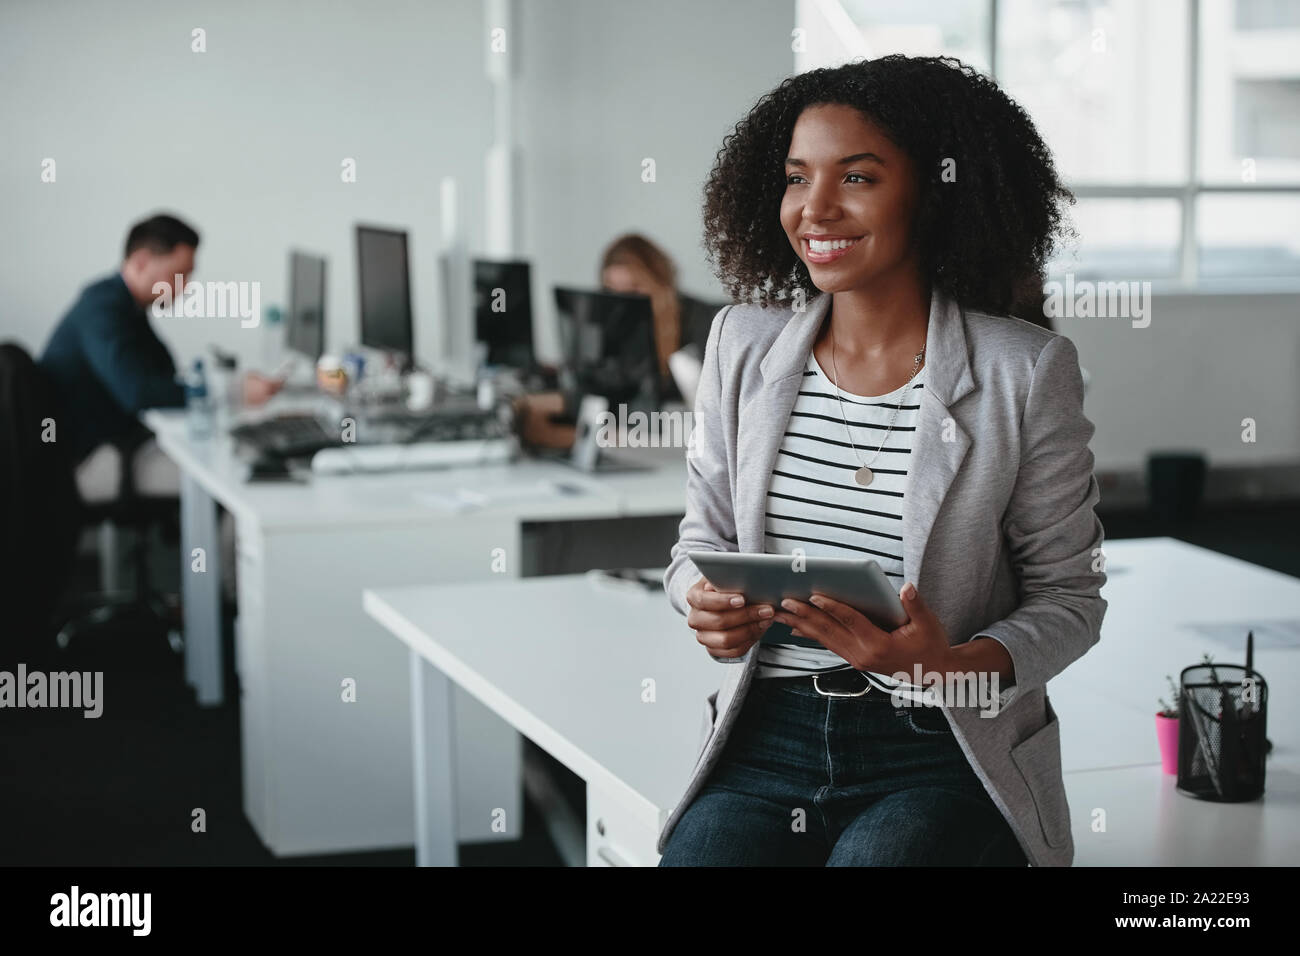 Happy thoughtful young businesswoman with digital tablet in hand smiling and looking away in front of colleague at background Stock Photo